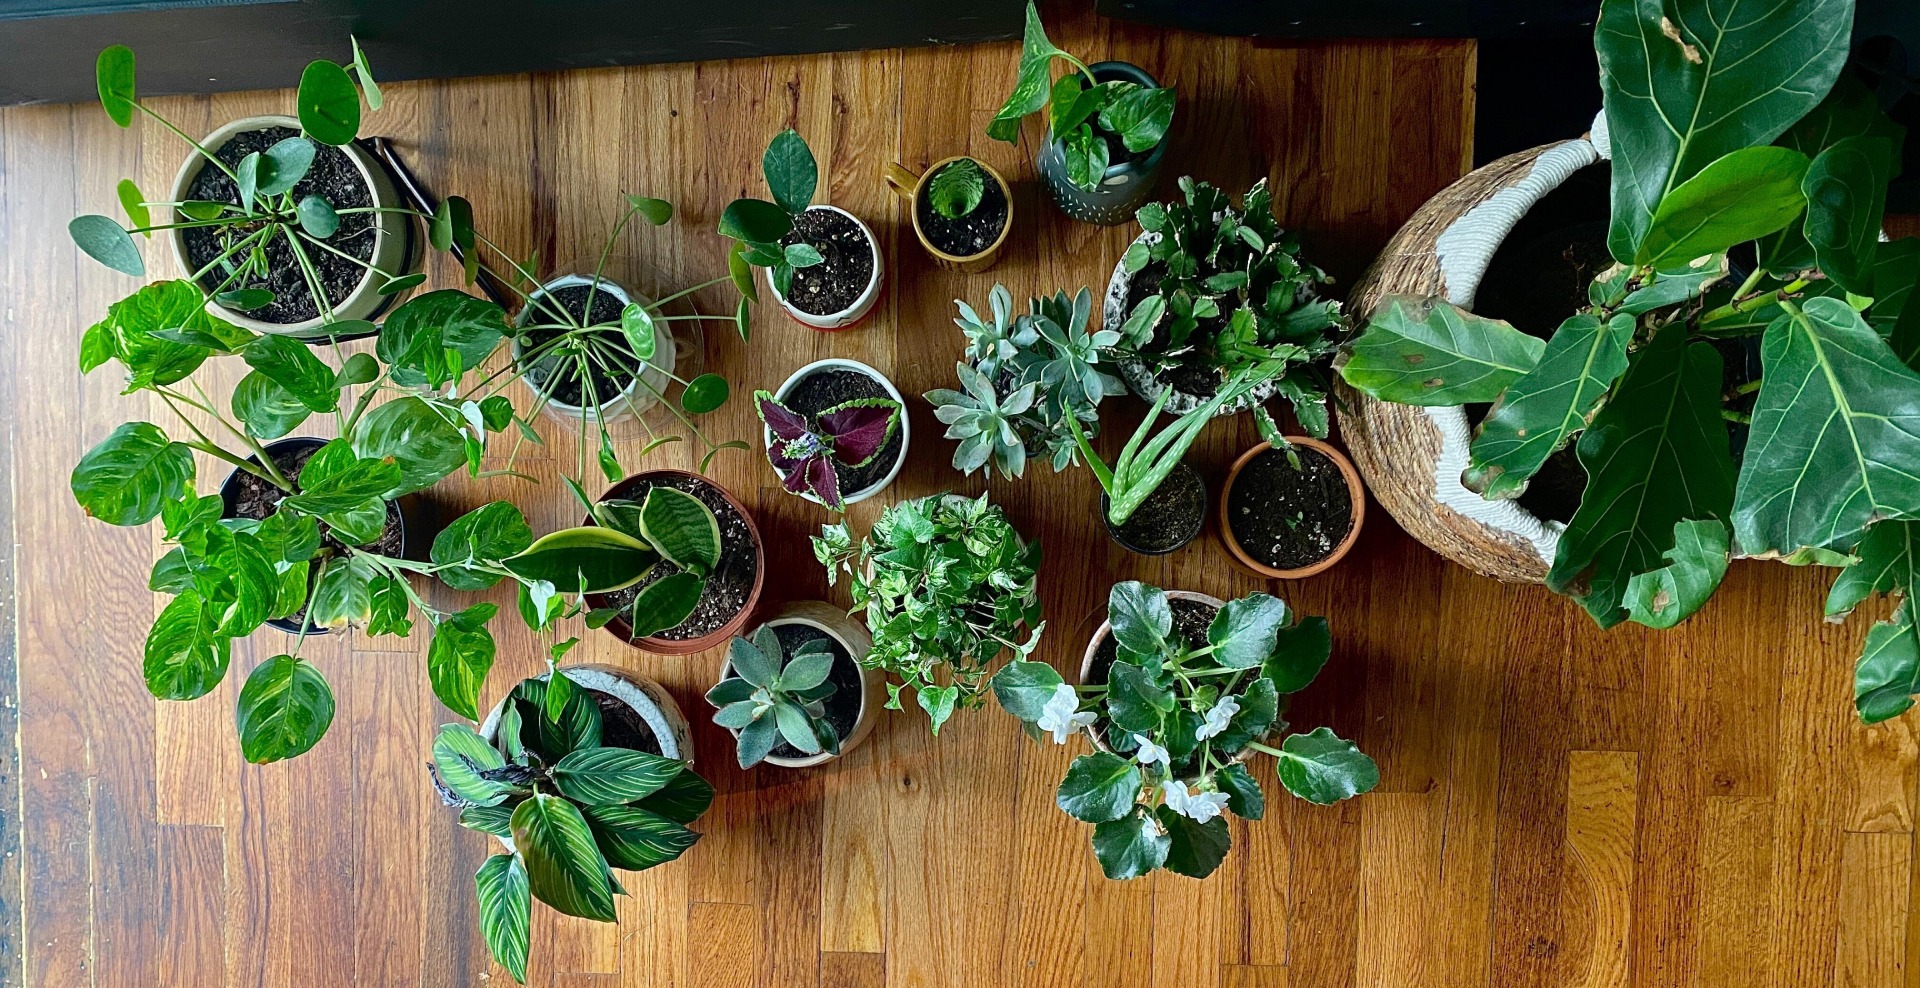 Houseplants indoor air quality - PlanetWatch